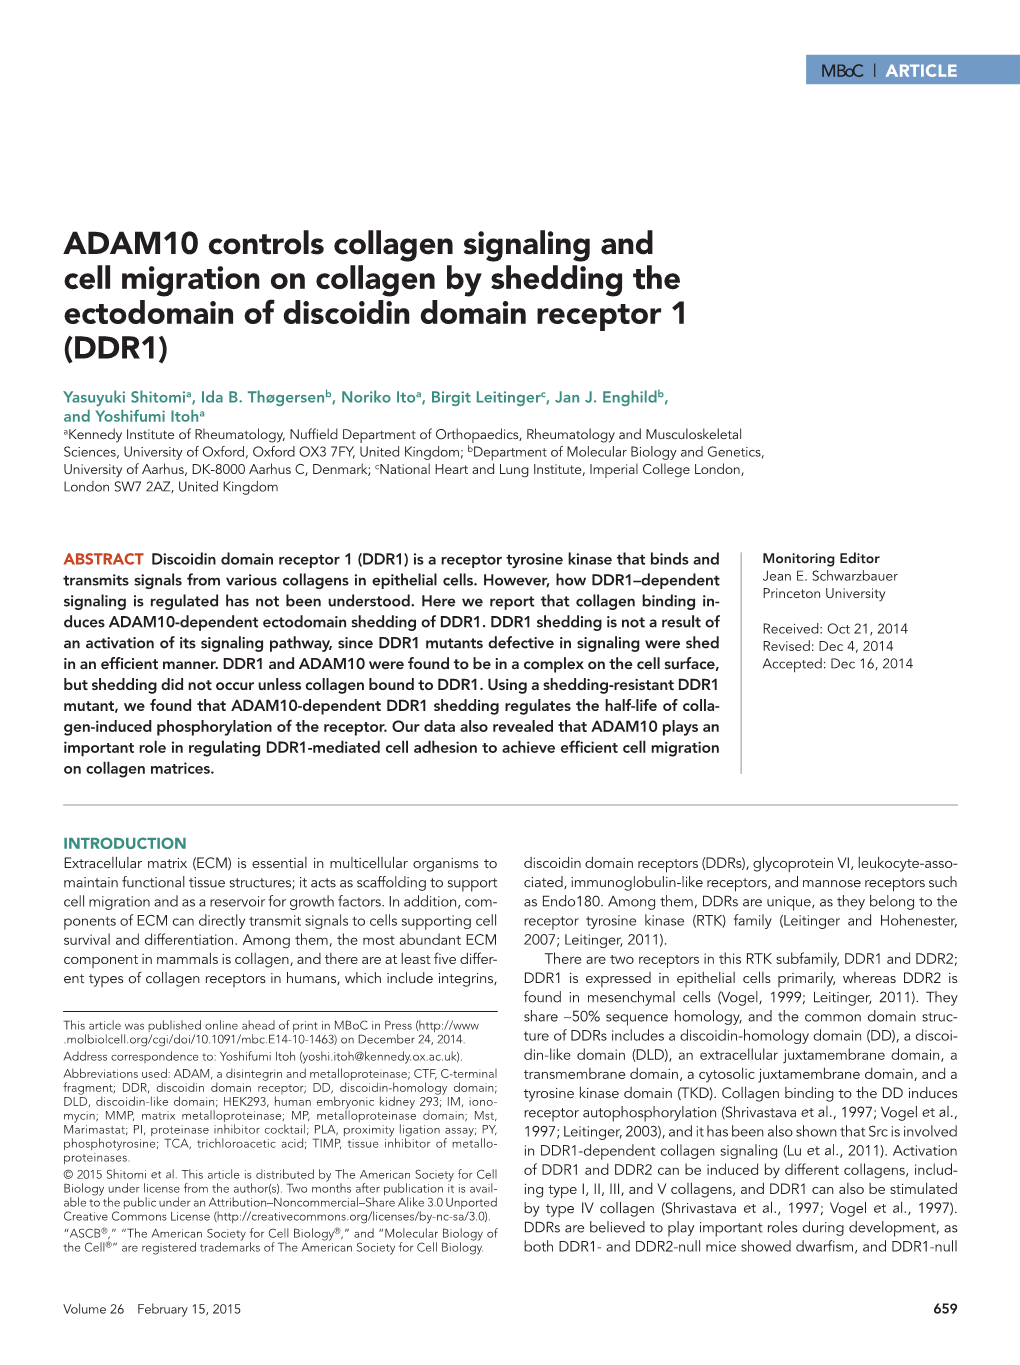 ADAM10 Controls Collagen Signaling and Cell Migration on Collagen by Shedding the Ectodomain of Discoidin Domain Receptor 1 (DDR1)